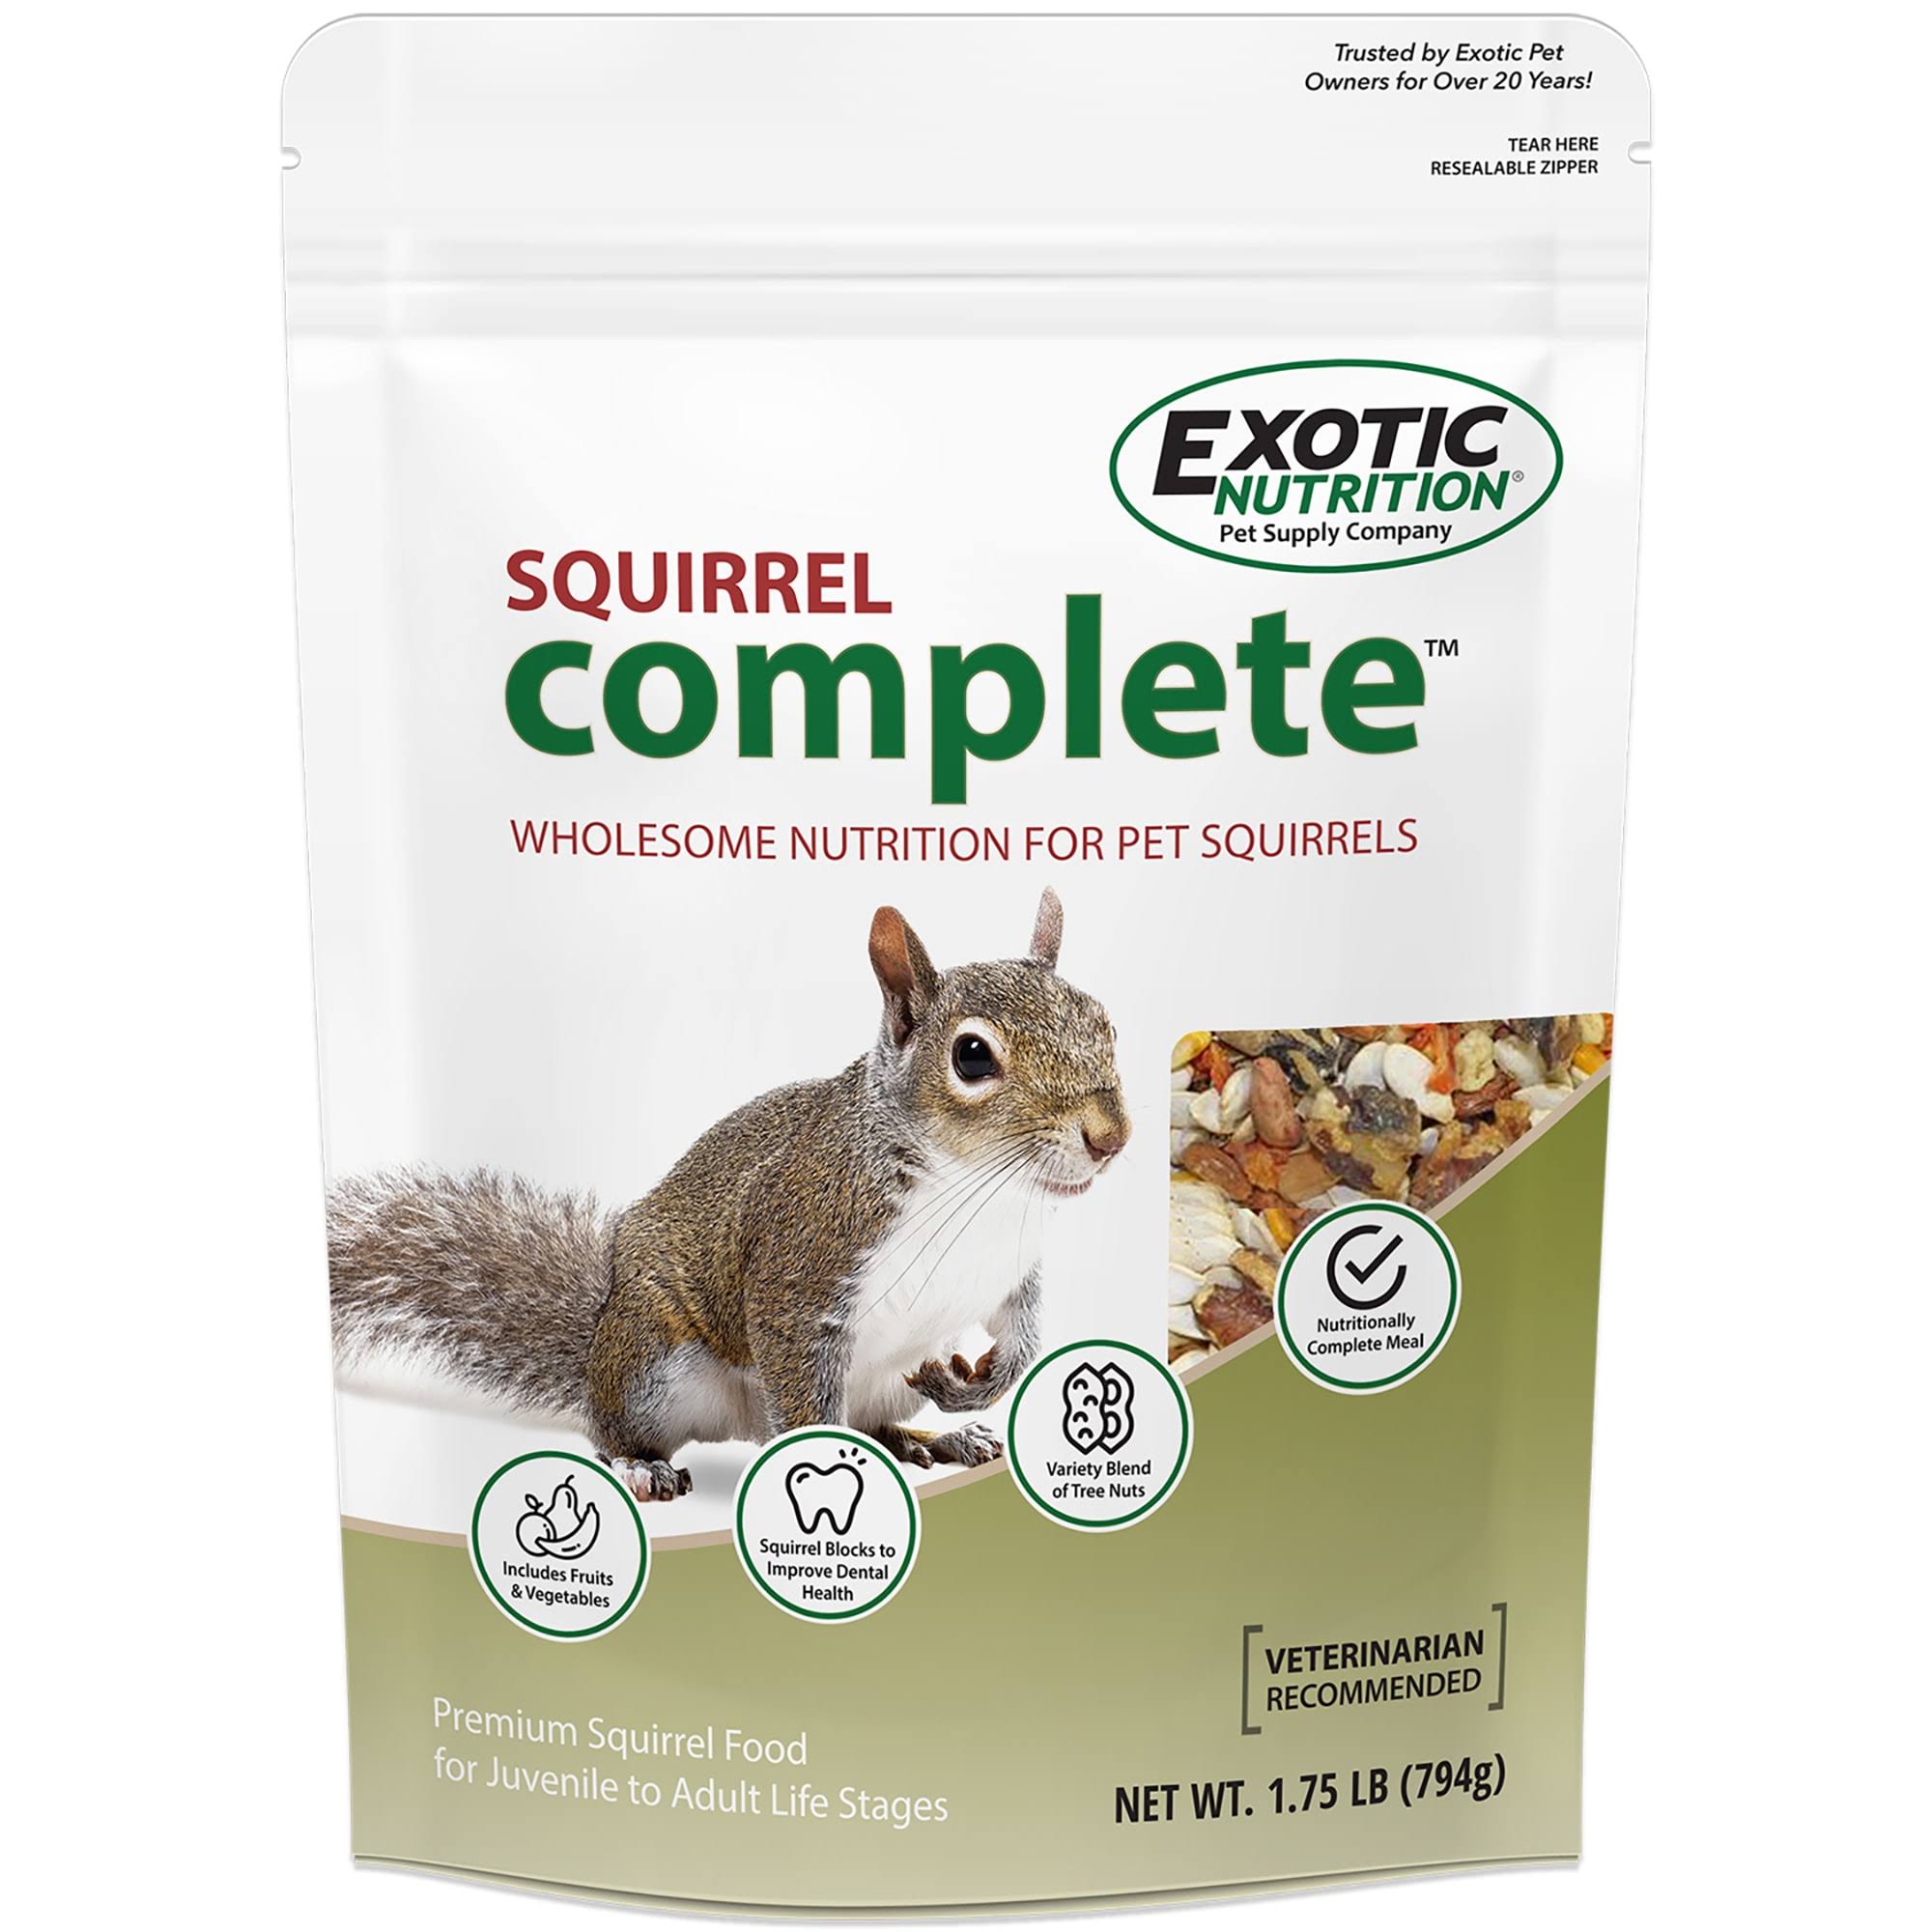 Squirrel Complete (1.75 lb.) - Healthy Natural Food - Nutritionally Complete Diet for Pet & Captive Squirrels - Ground Squirrels, Grey Squirrels,